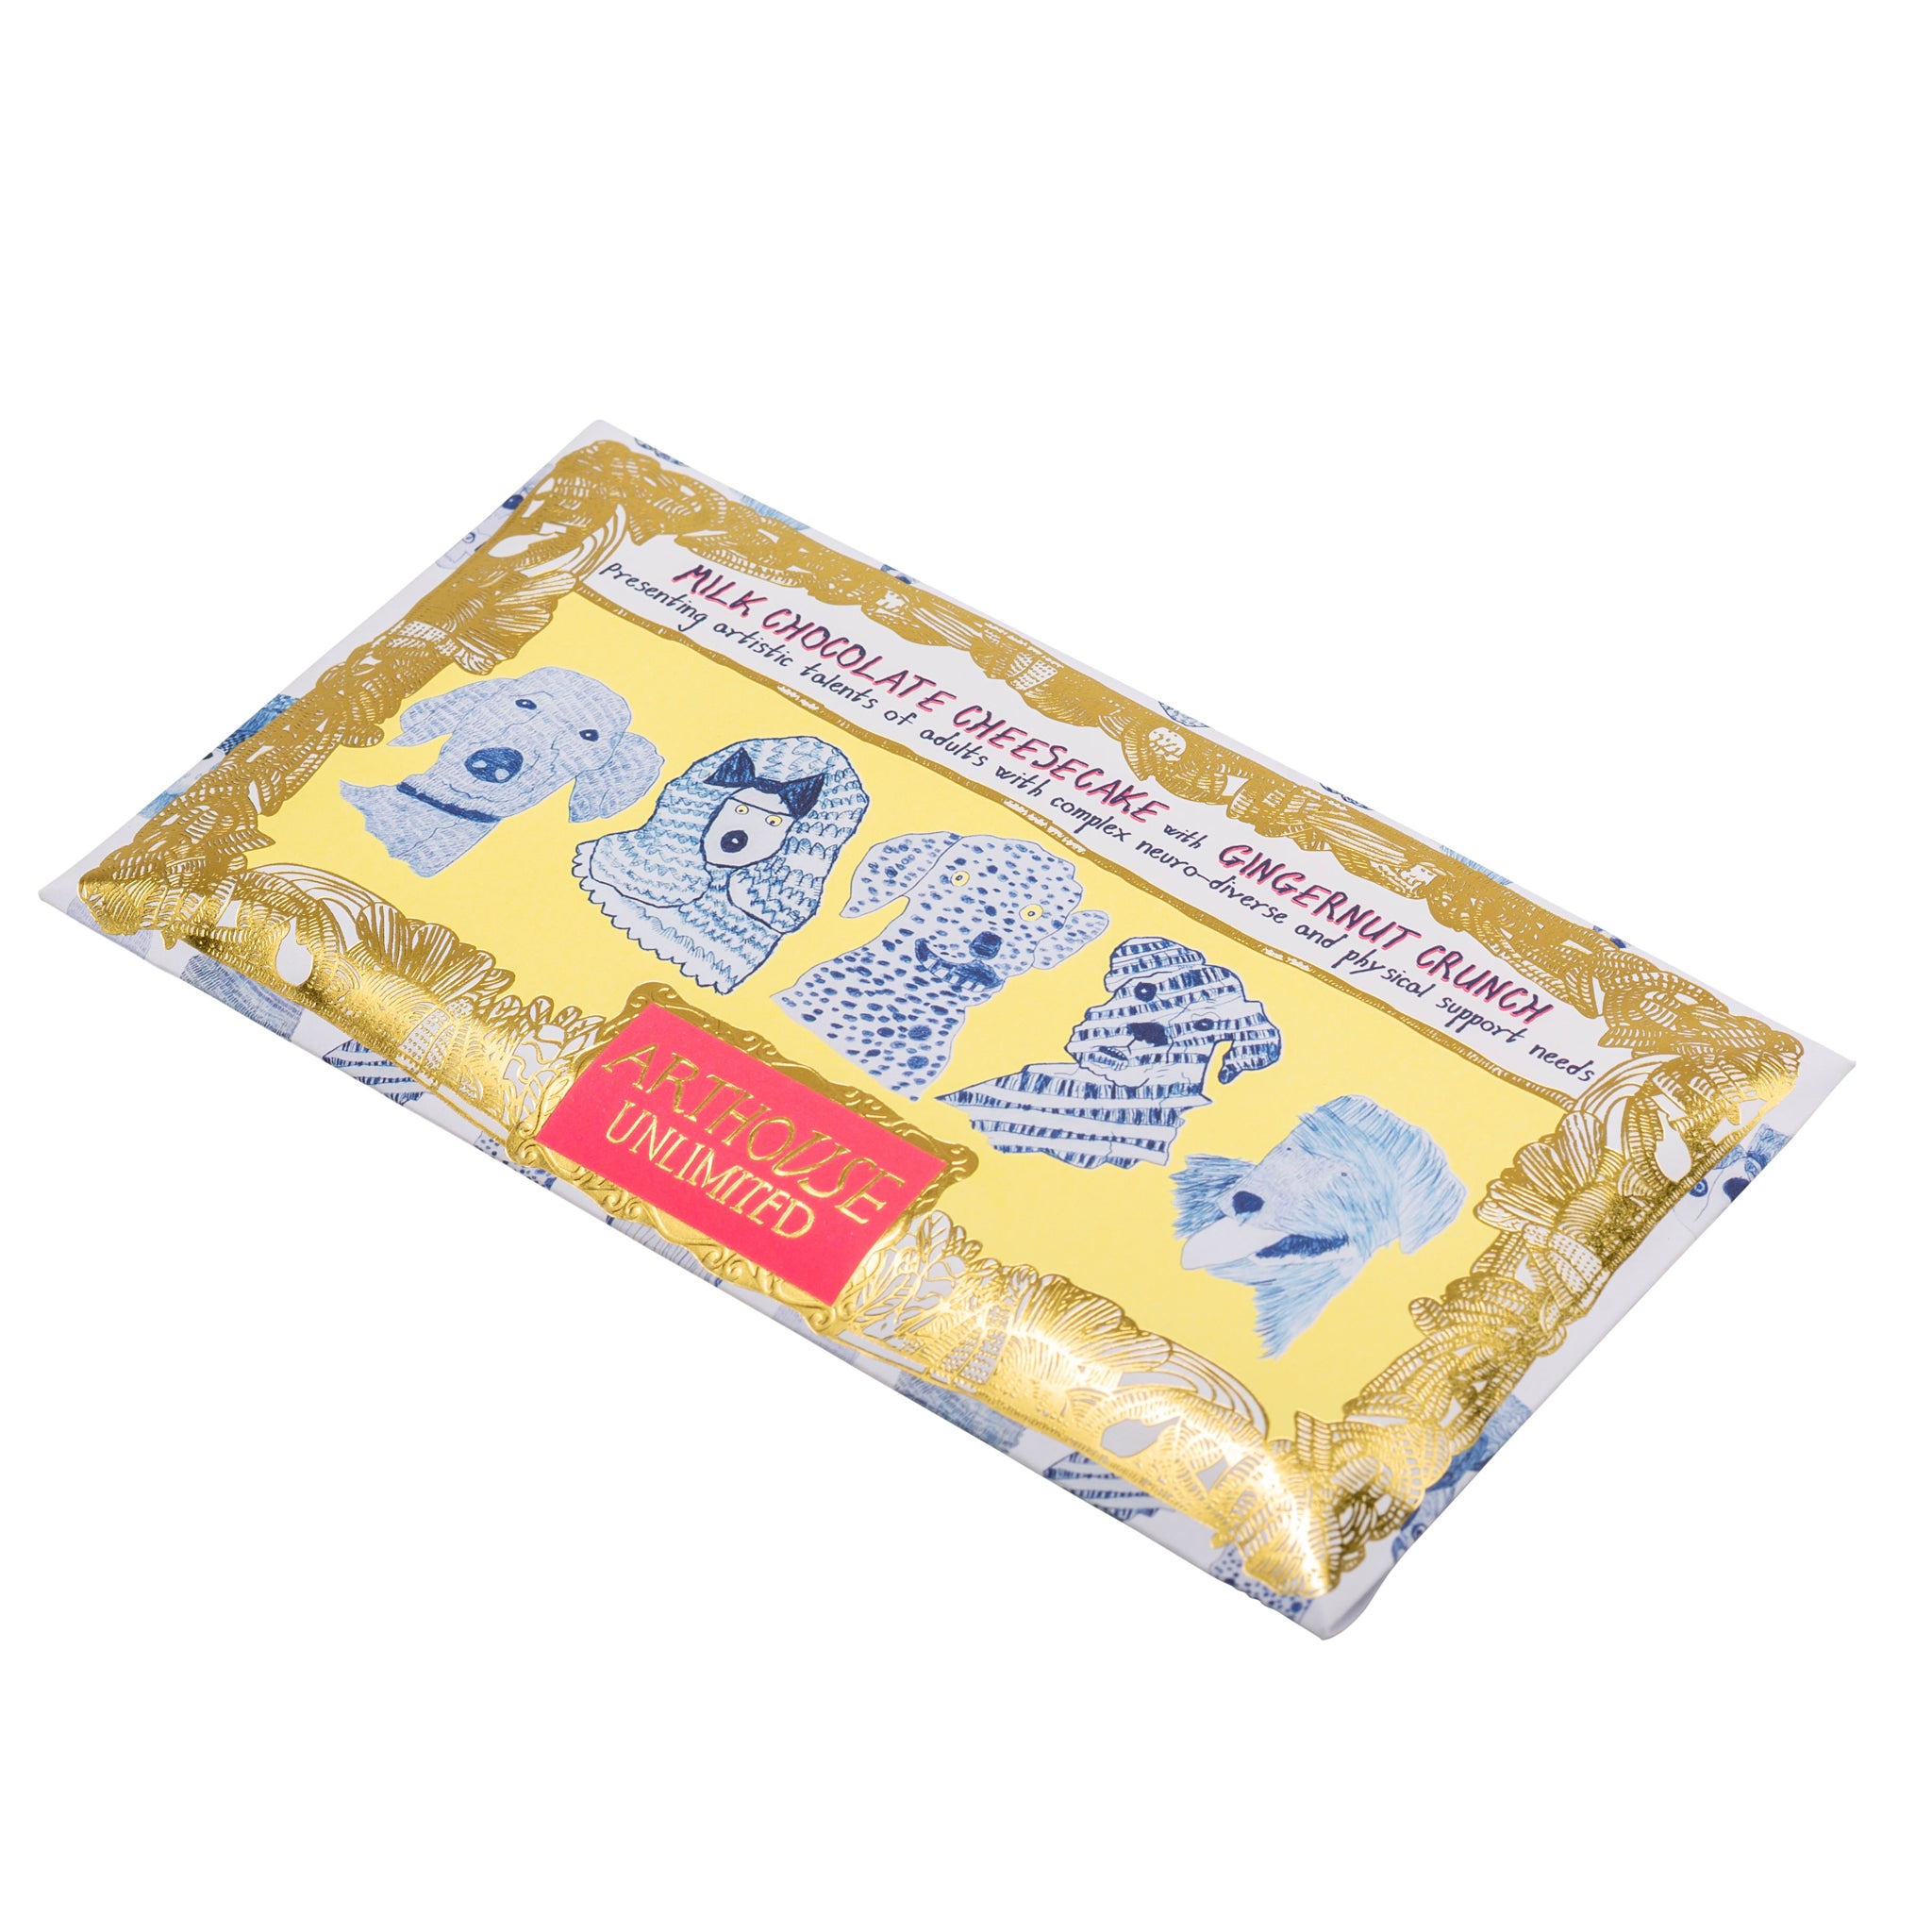 Blue Dogs, Milk Chocolate Bar Cheesecake with Gingernut Crunch, blue and yellow packaging